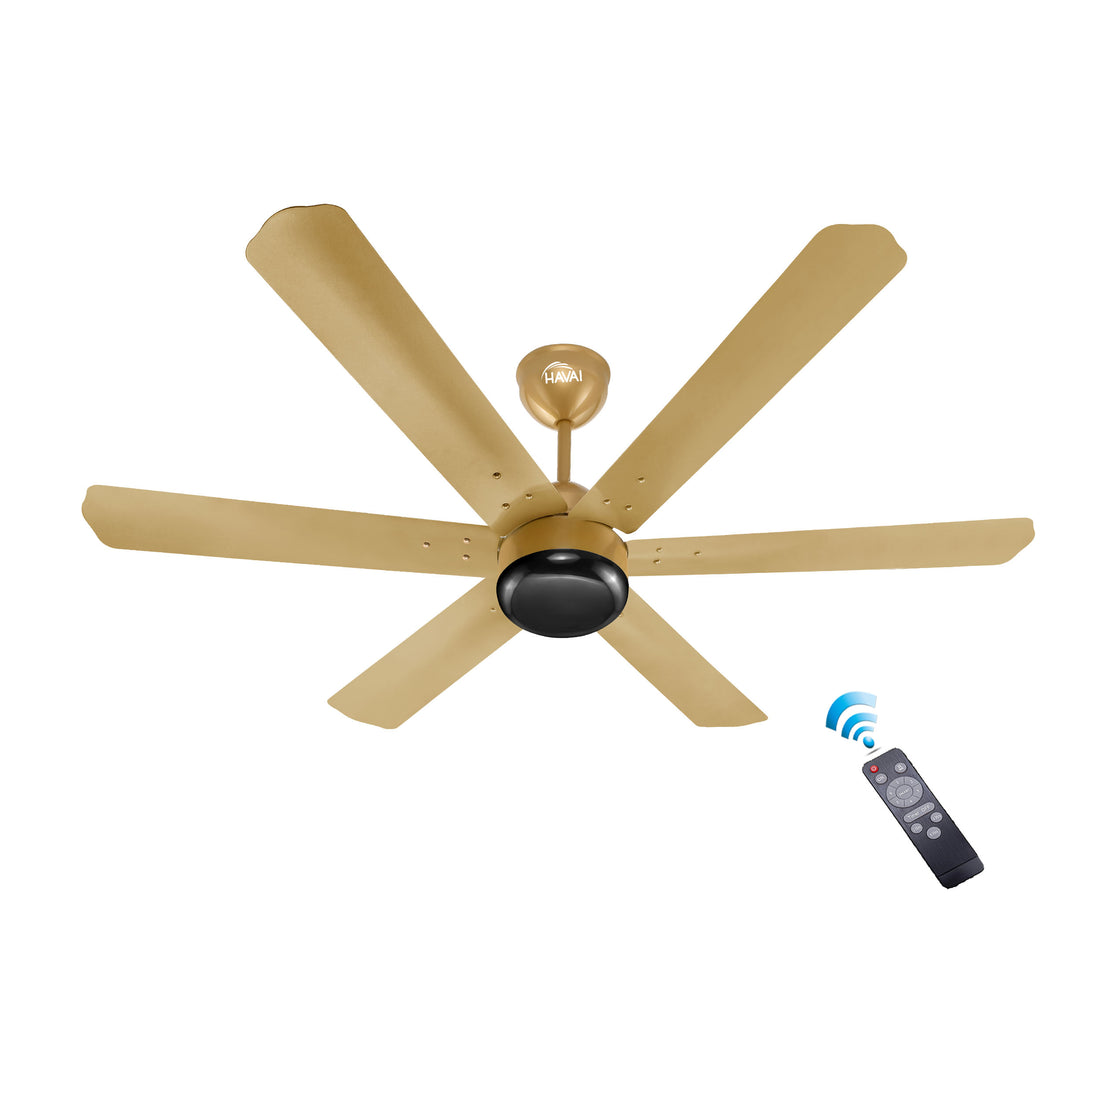 HAVAI Spinel BLDC Ceiling Fan - 6 Blades – Black Motor - 35W, 1200mm Blade with Remote – 0.5W LED (Champagne Yellow)